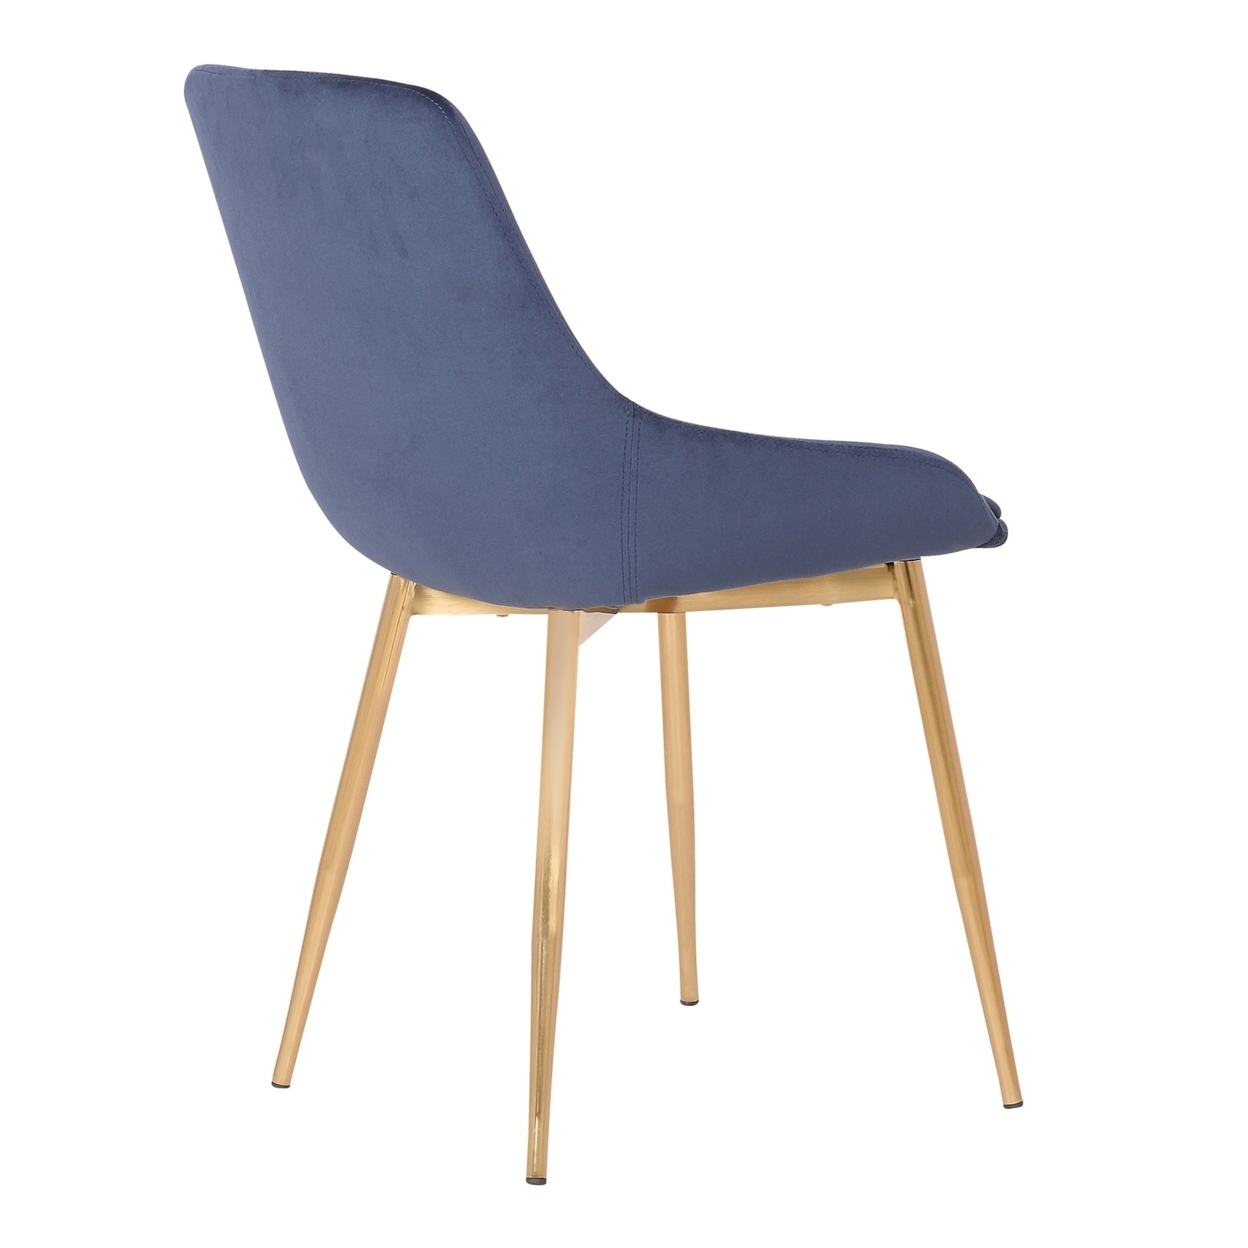 Countered Fabric Upholstered Dining Chair With Sleek Metal Legs, Blue- Saltoro Sherpi